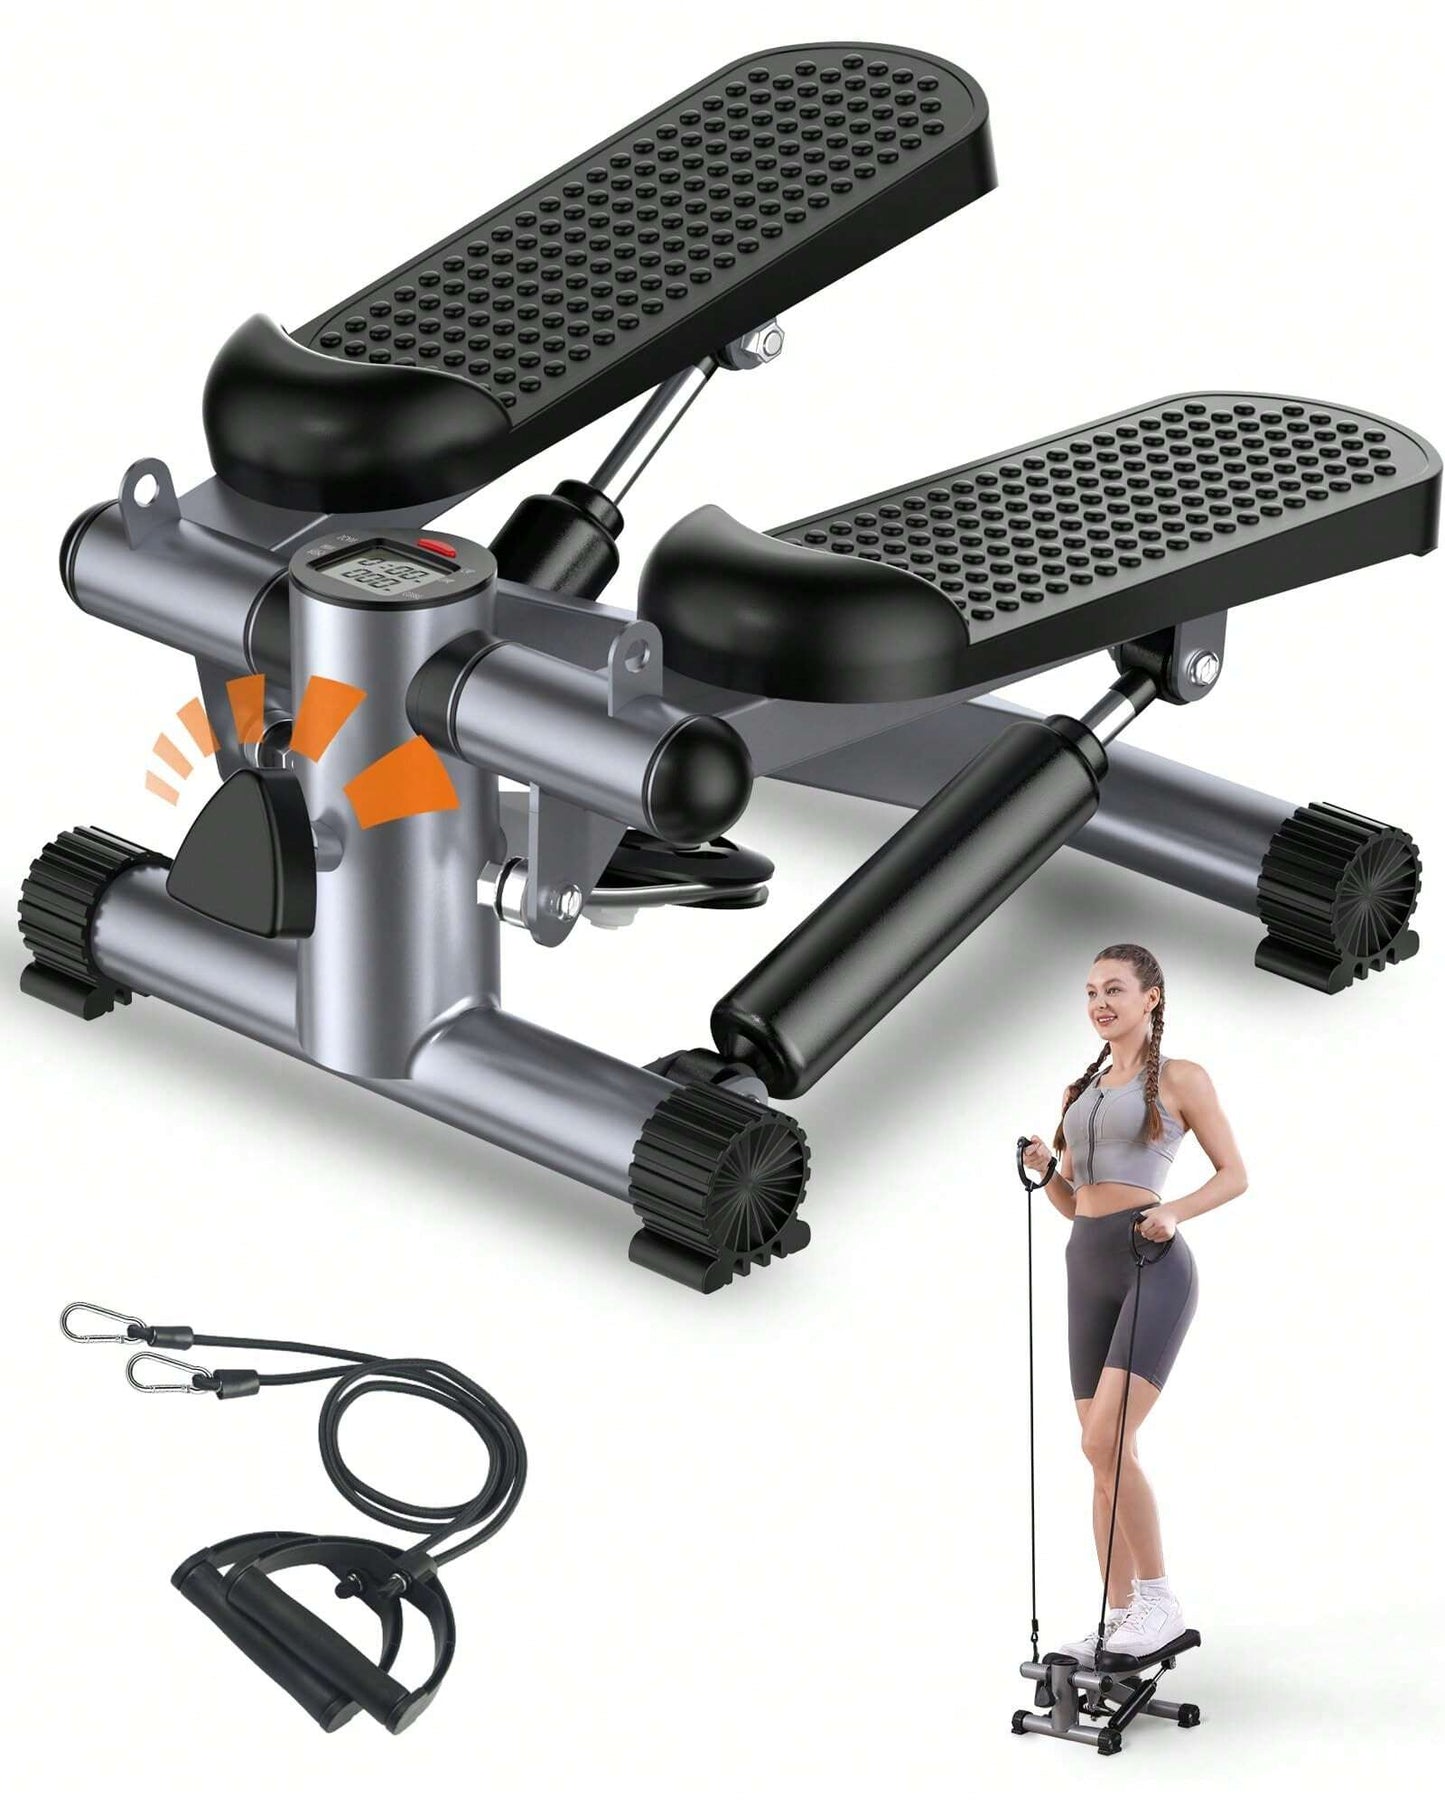 Compact Exercise Stepper with Resistance Band for Home Workouts. Supports up to 350lbs, Counts Calories, and Promotes Efficient Fat Burning. Ideal for Indoor Fitness Anytime, Anywhere.